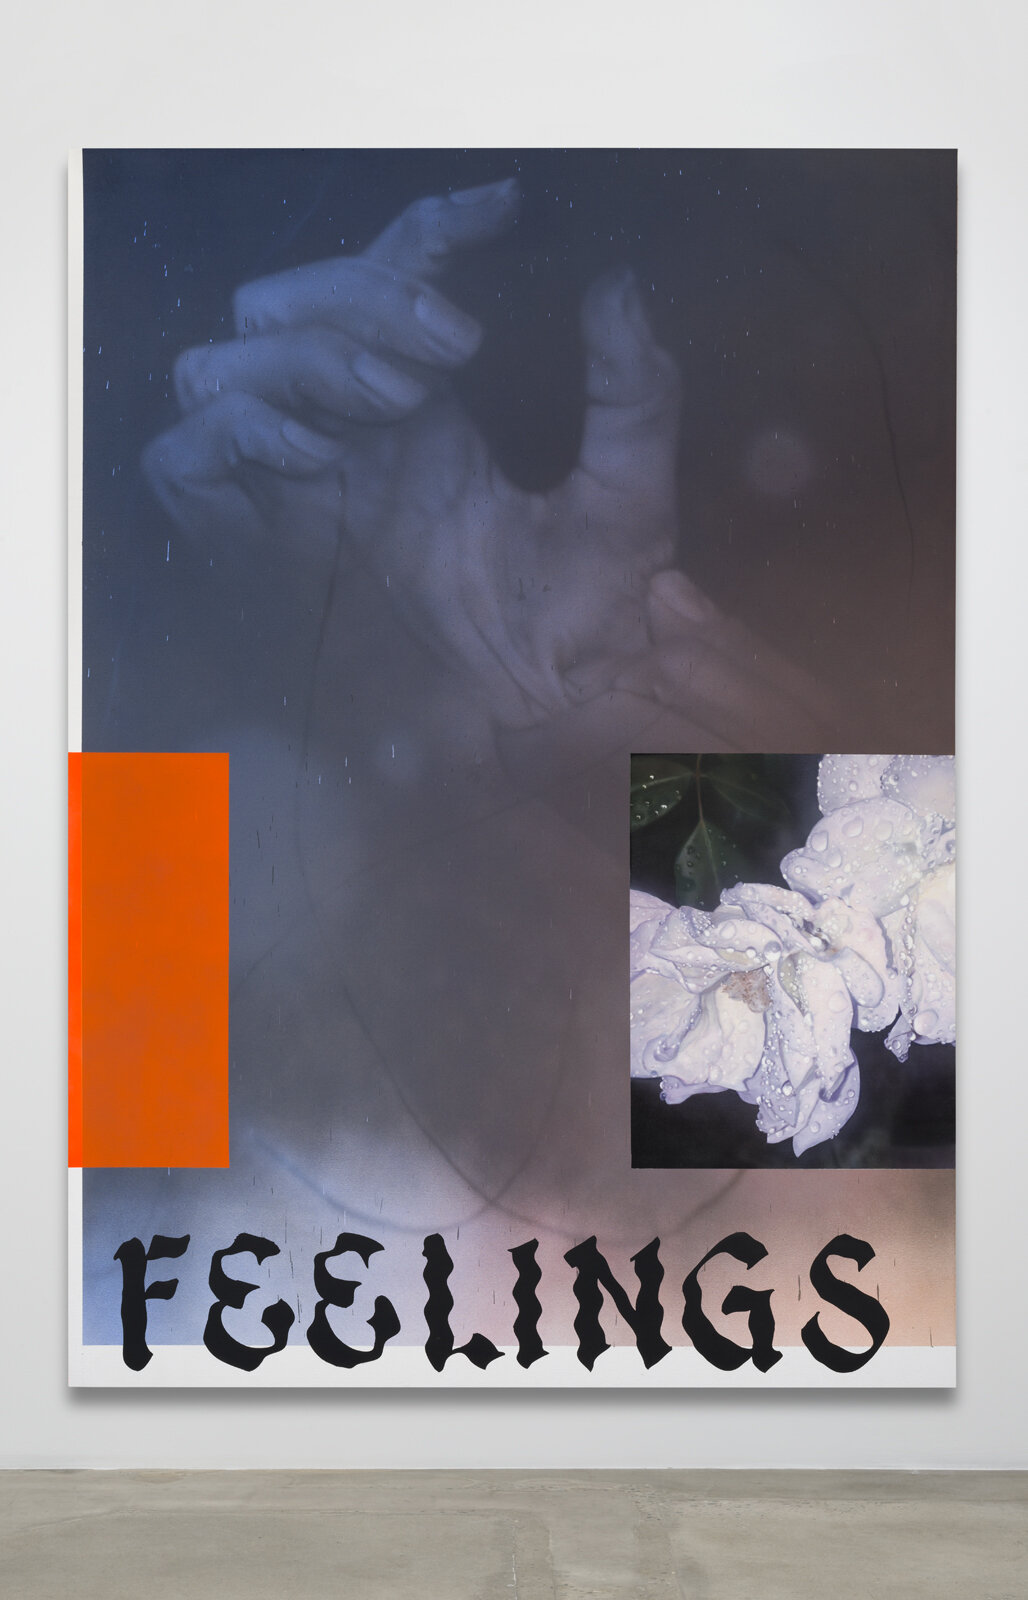   Feelings Painting 3 , 2016. Acrylic on canvas. 30 x 24 inches 